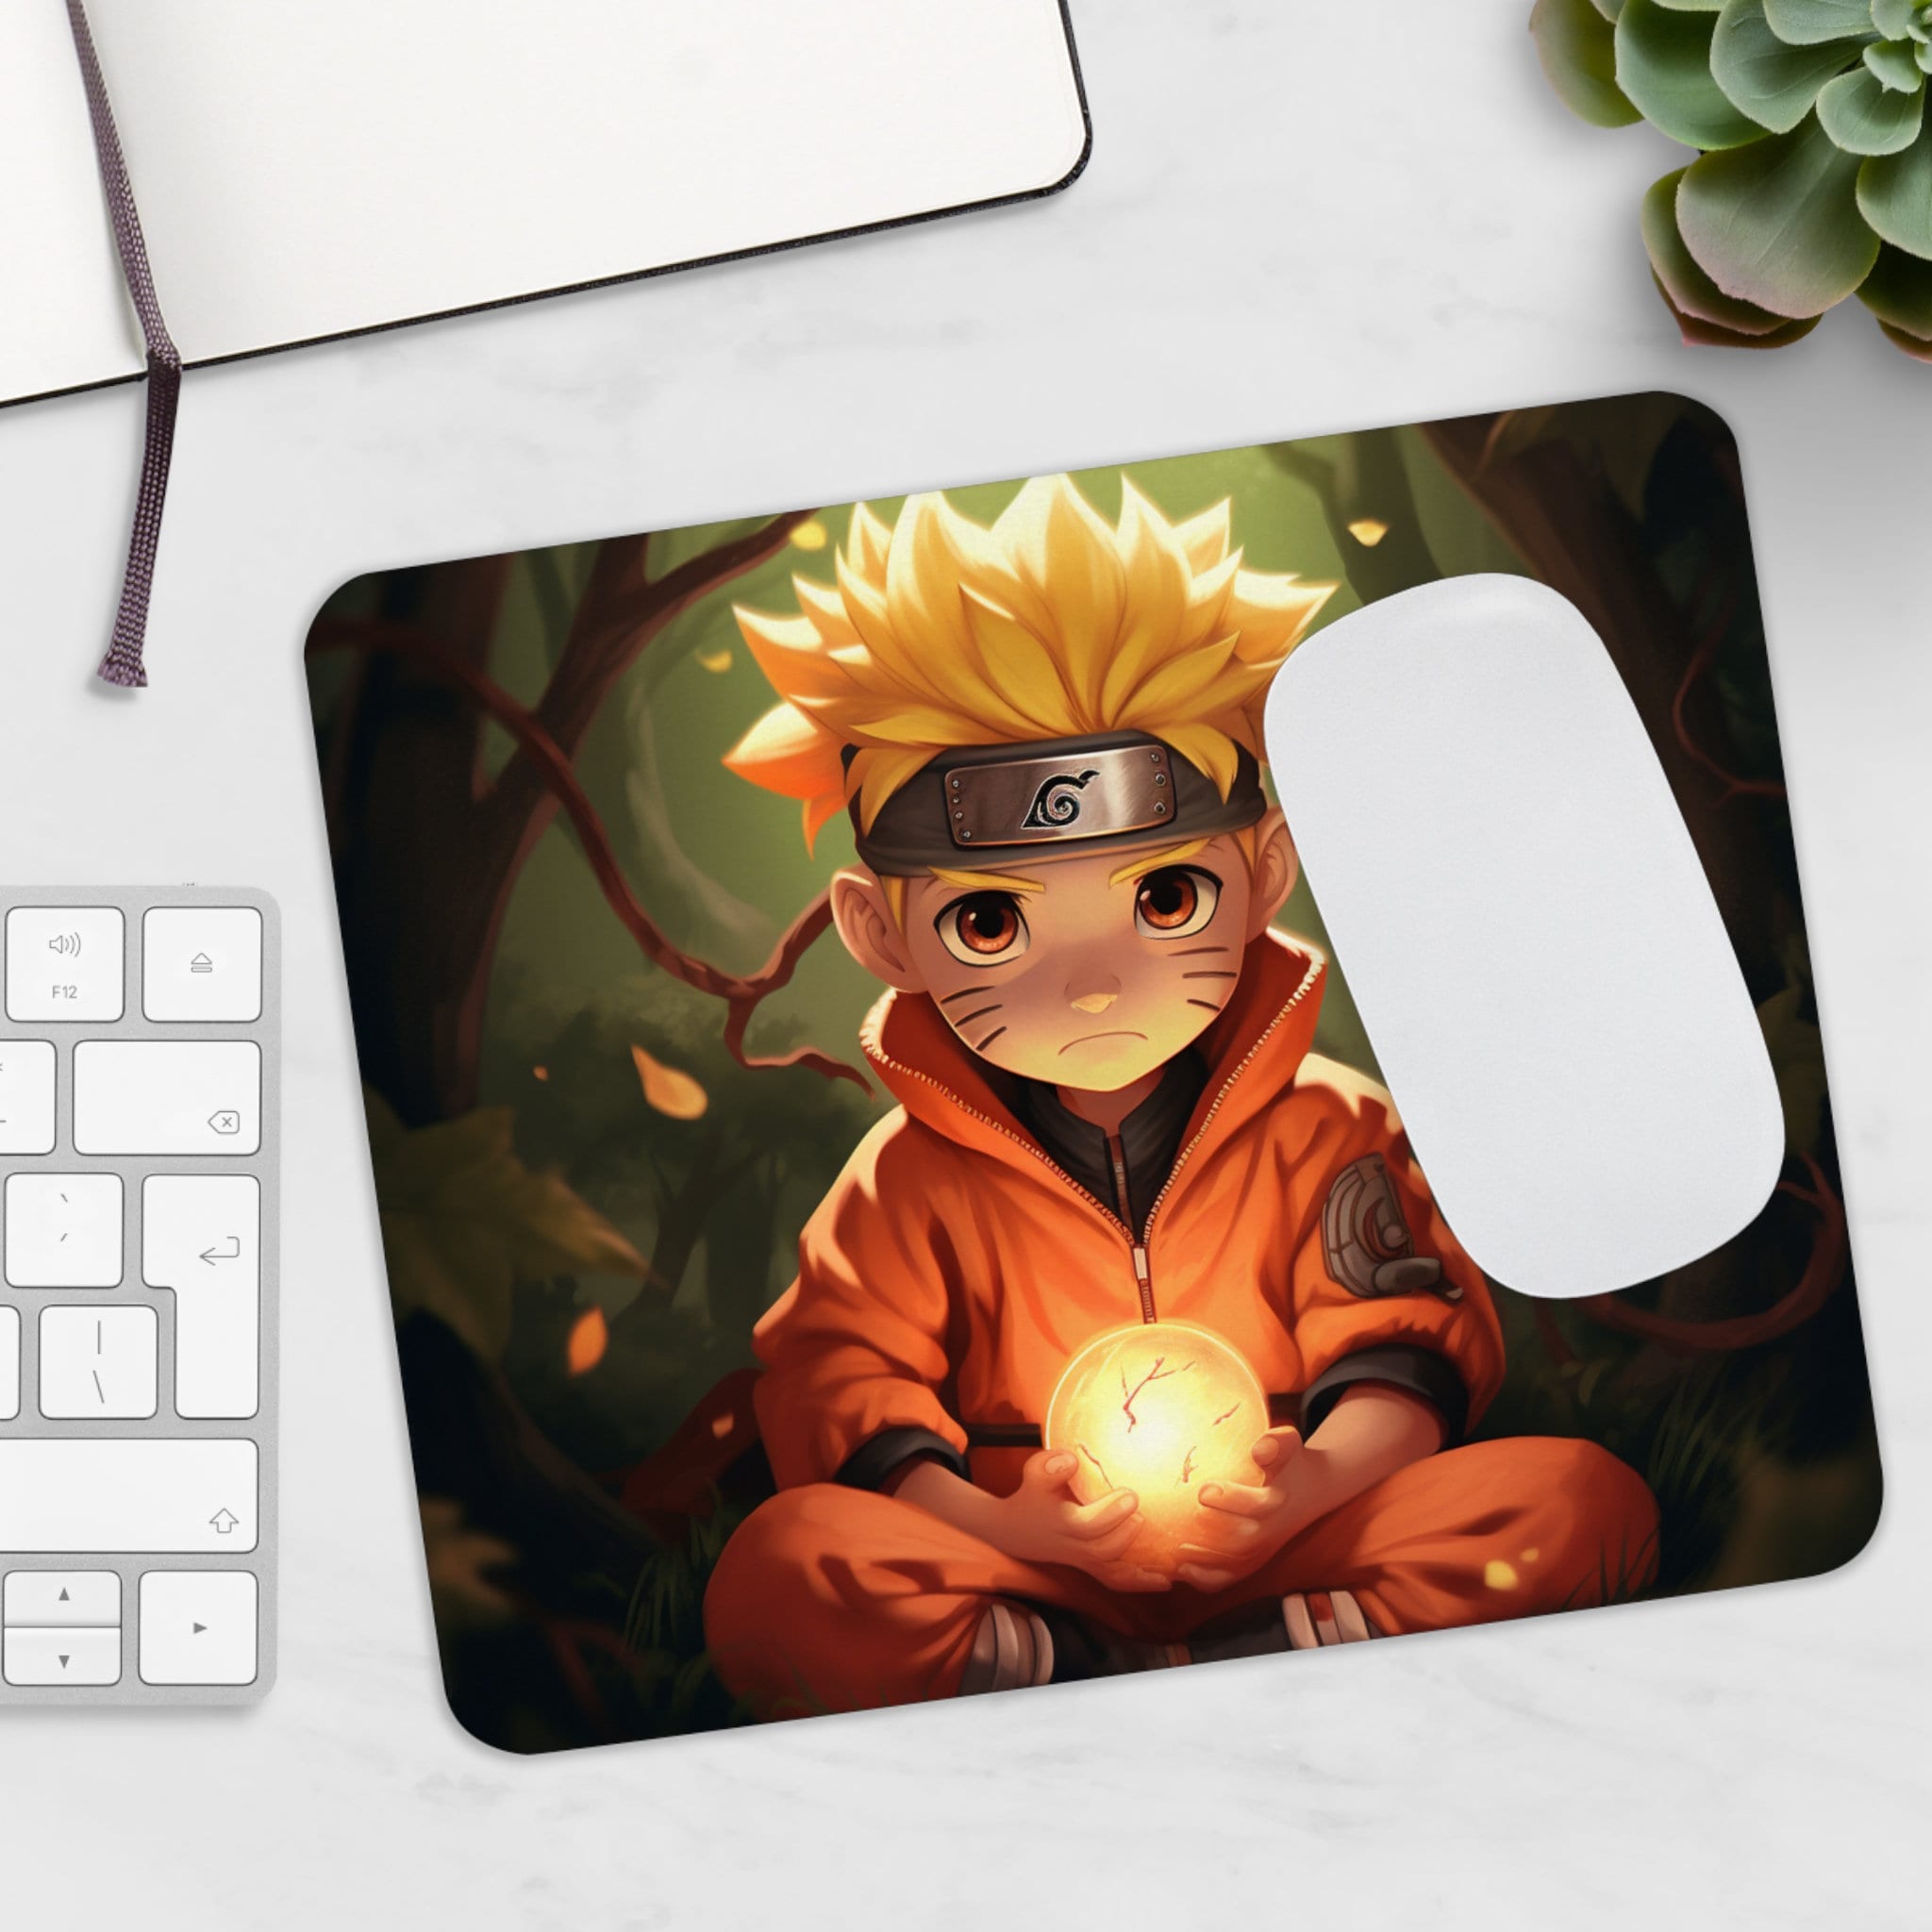 27 Naruto Drawing Ideas For Anime Lovers - DIYsCraftsy